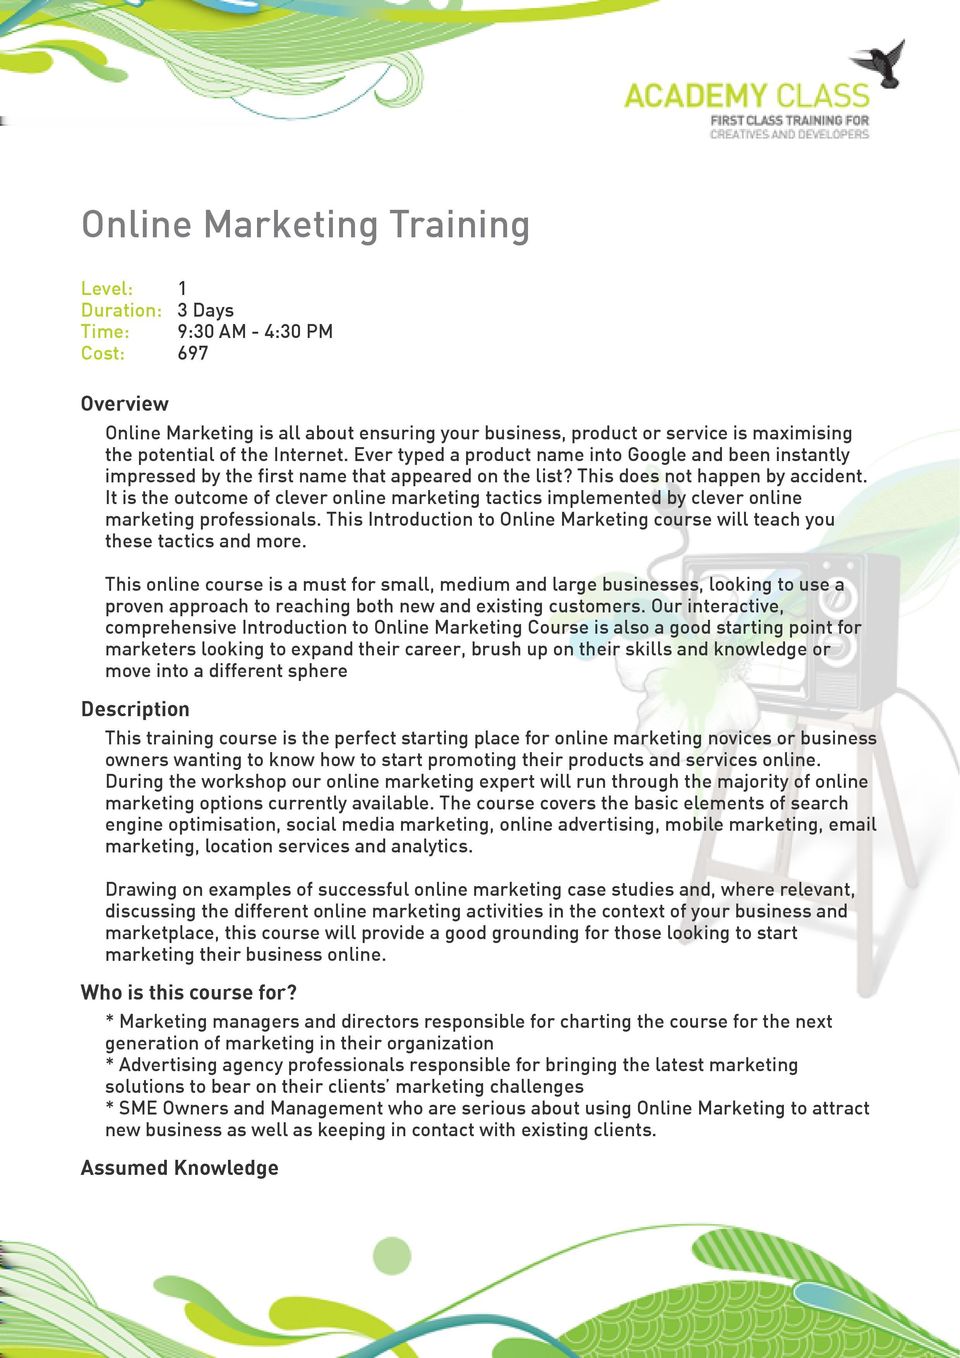 It is the outcome of clever online marketing tactics implemented by clever online marketing professionals. This Introduction to Online Marketing course will teach you these tactics and more.